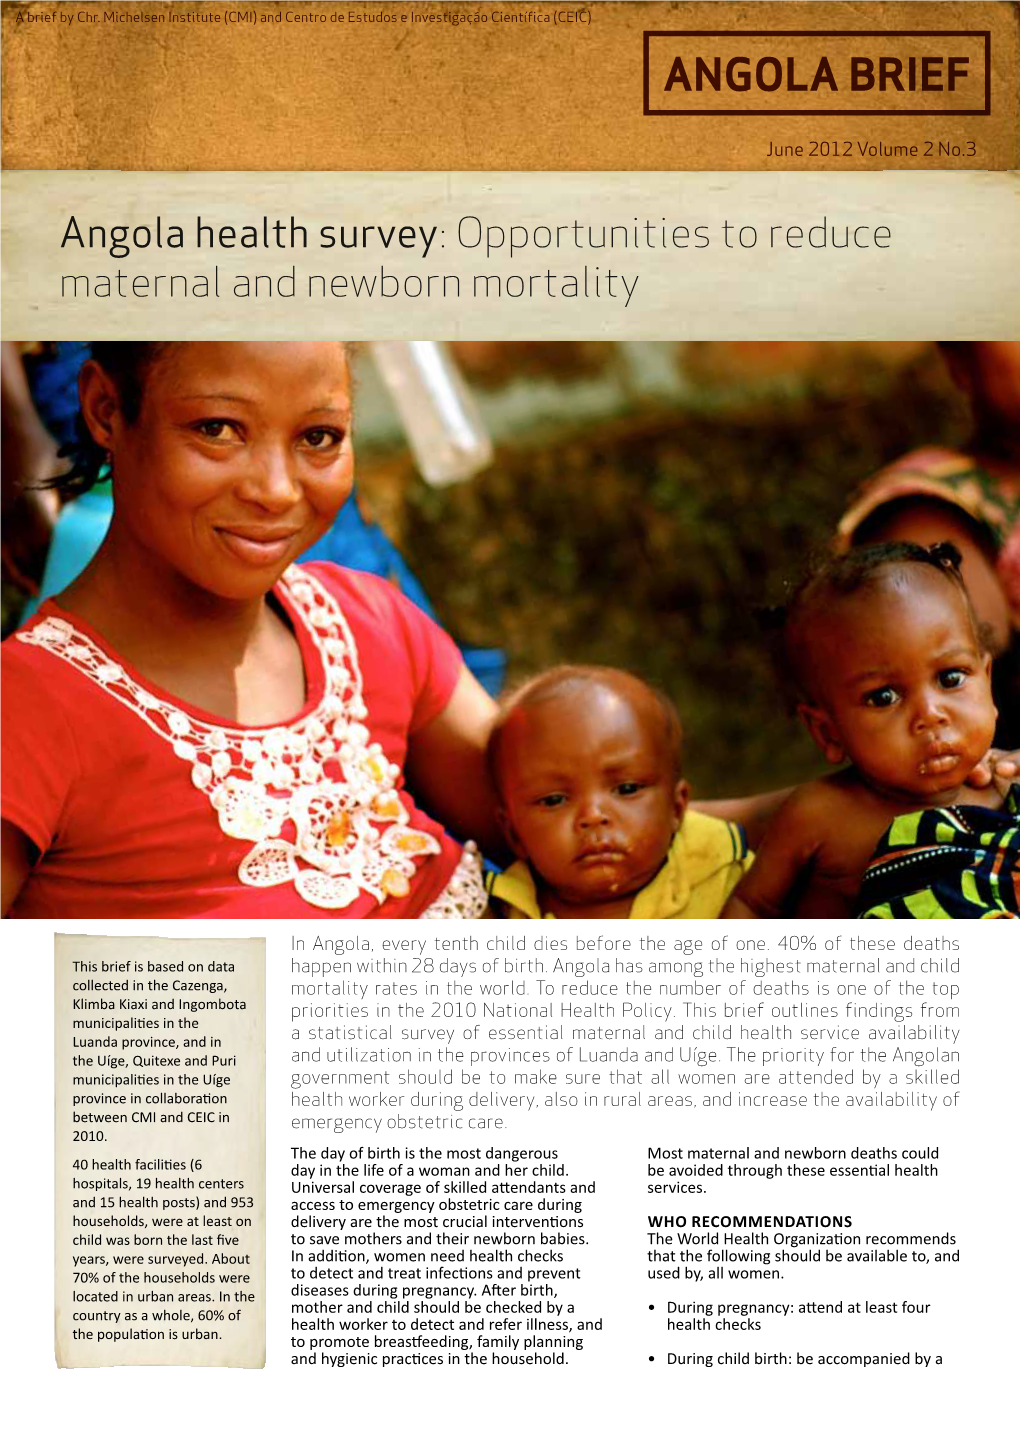 Angola Health Survey: Opportunities to Reduce Maternal and Newborn Mortality